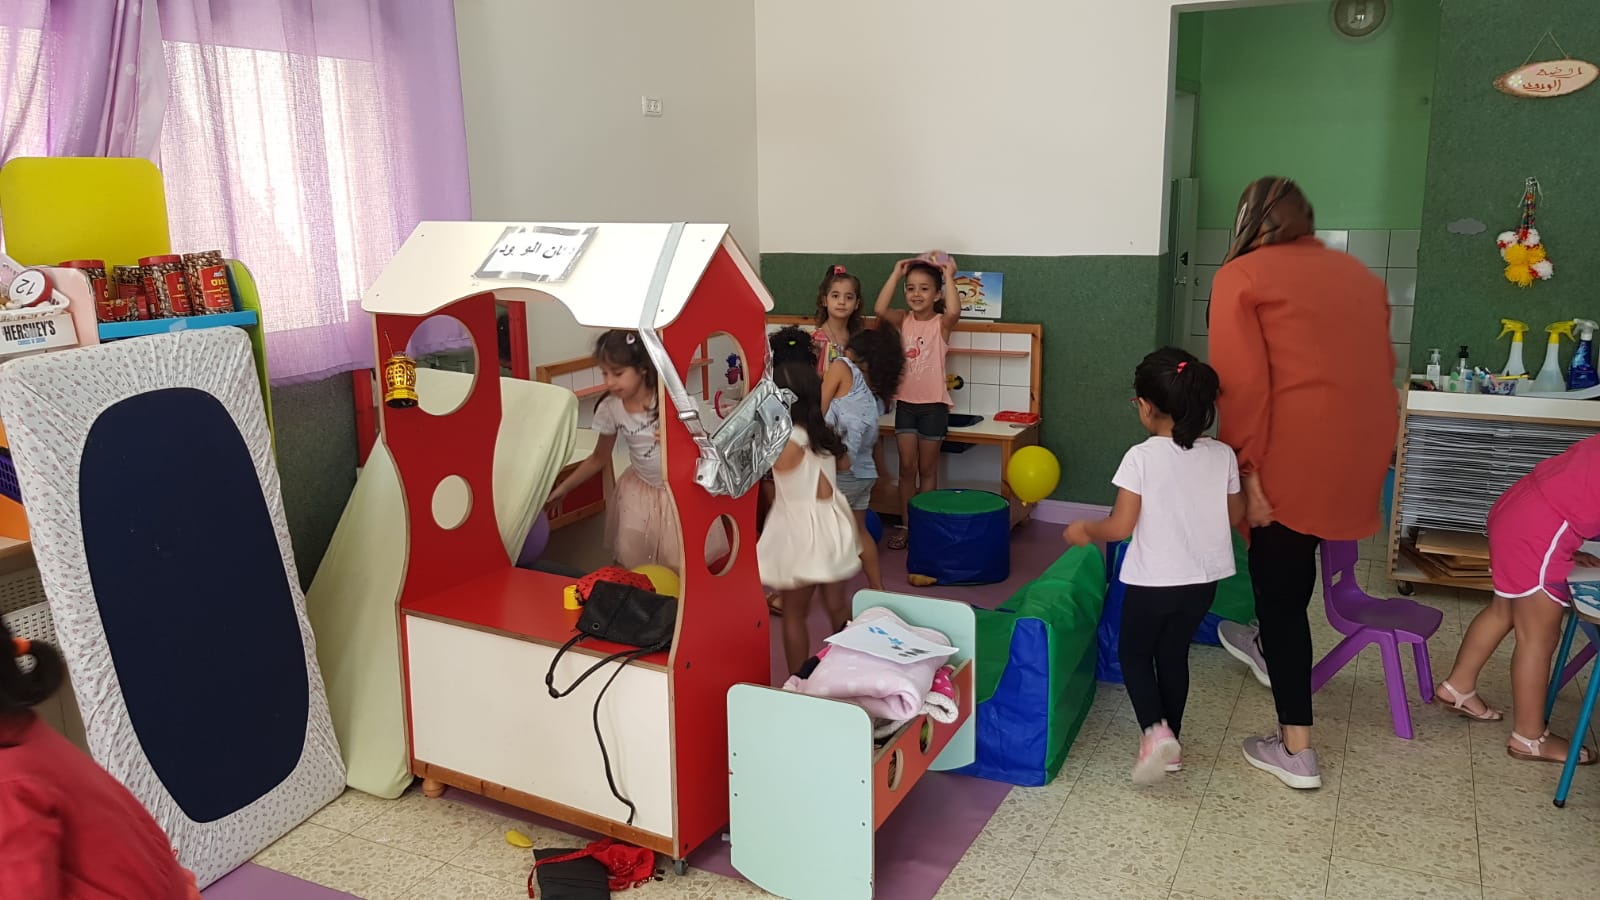 The Ministry of Education has published the details of the operation of the kindergartens and schools during the holiday